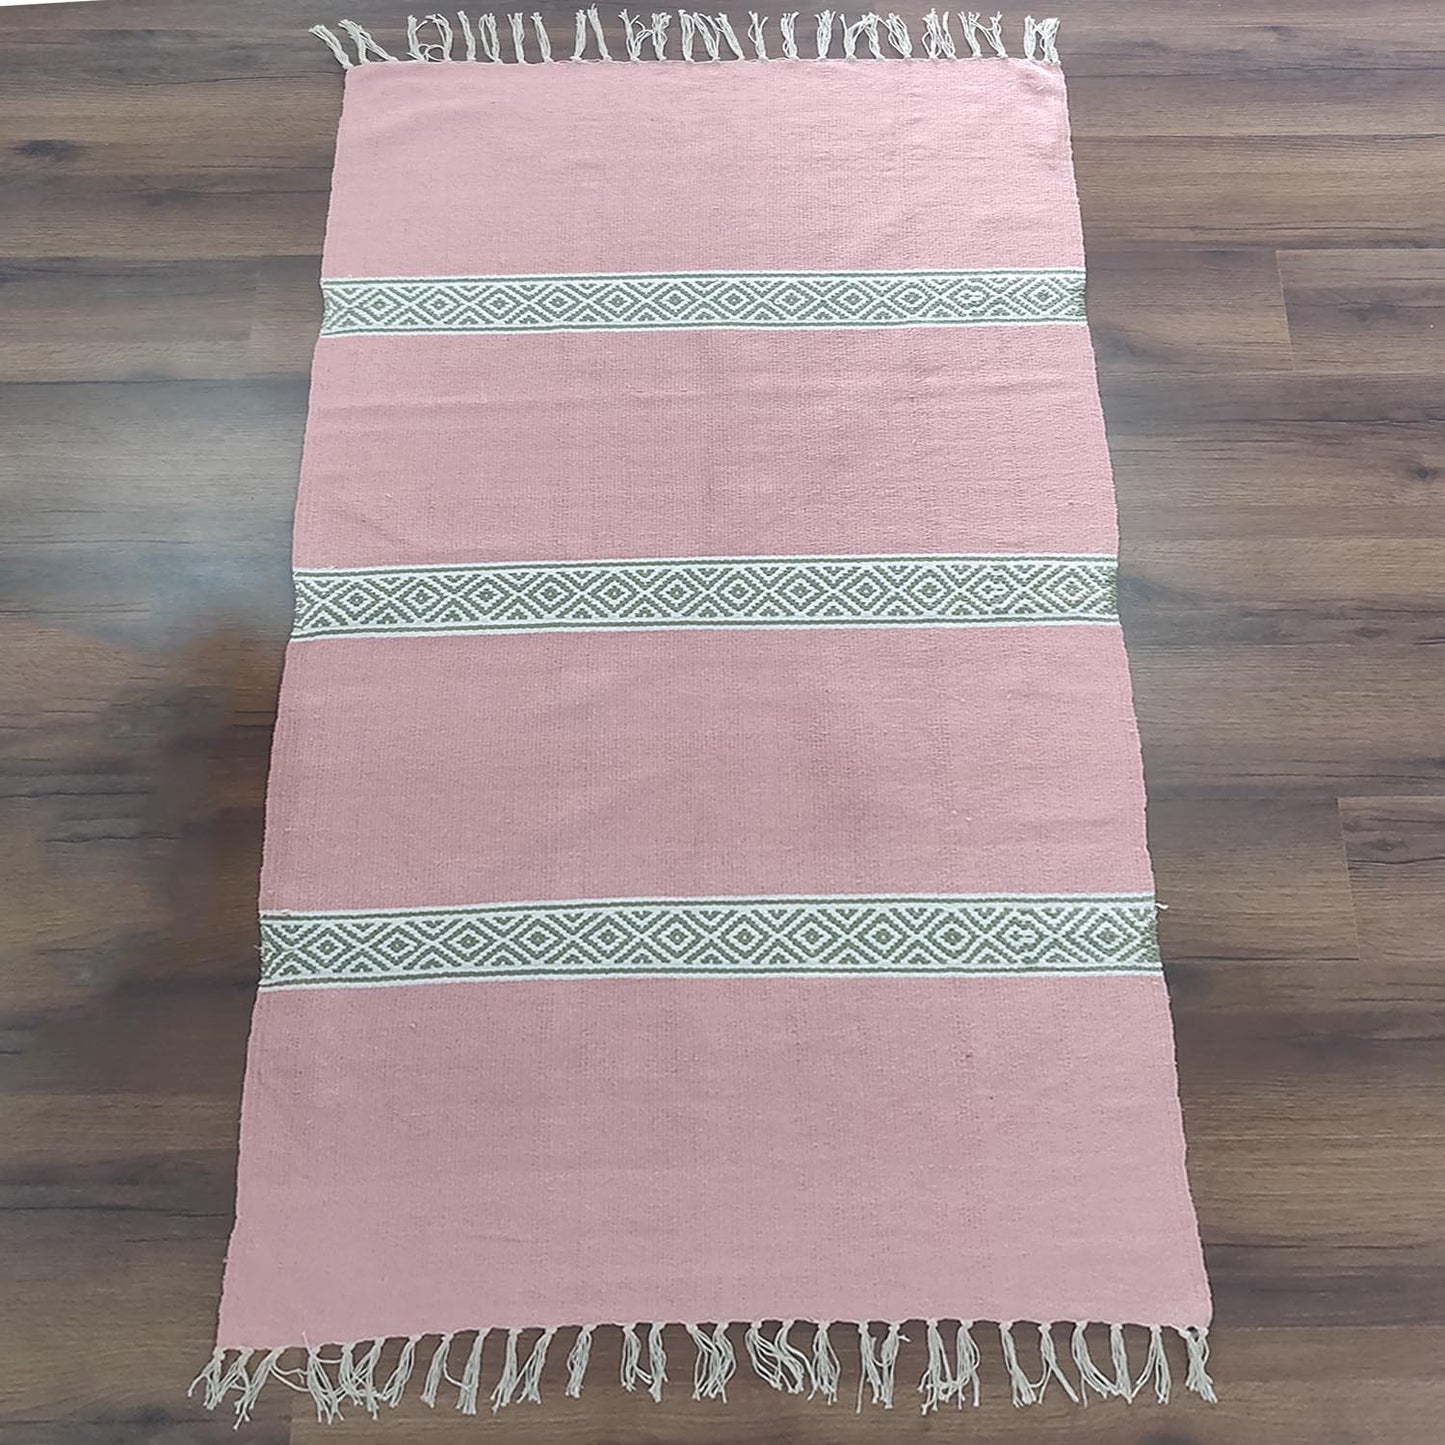 Avioni 100% Cotton Handloom Floor Rug / Durrie – Neohome Collection – Green stripes on pink background